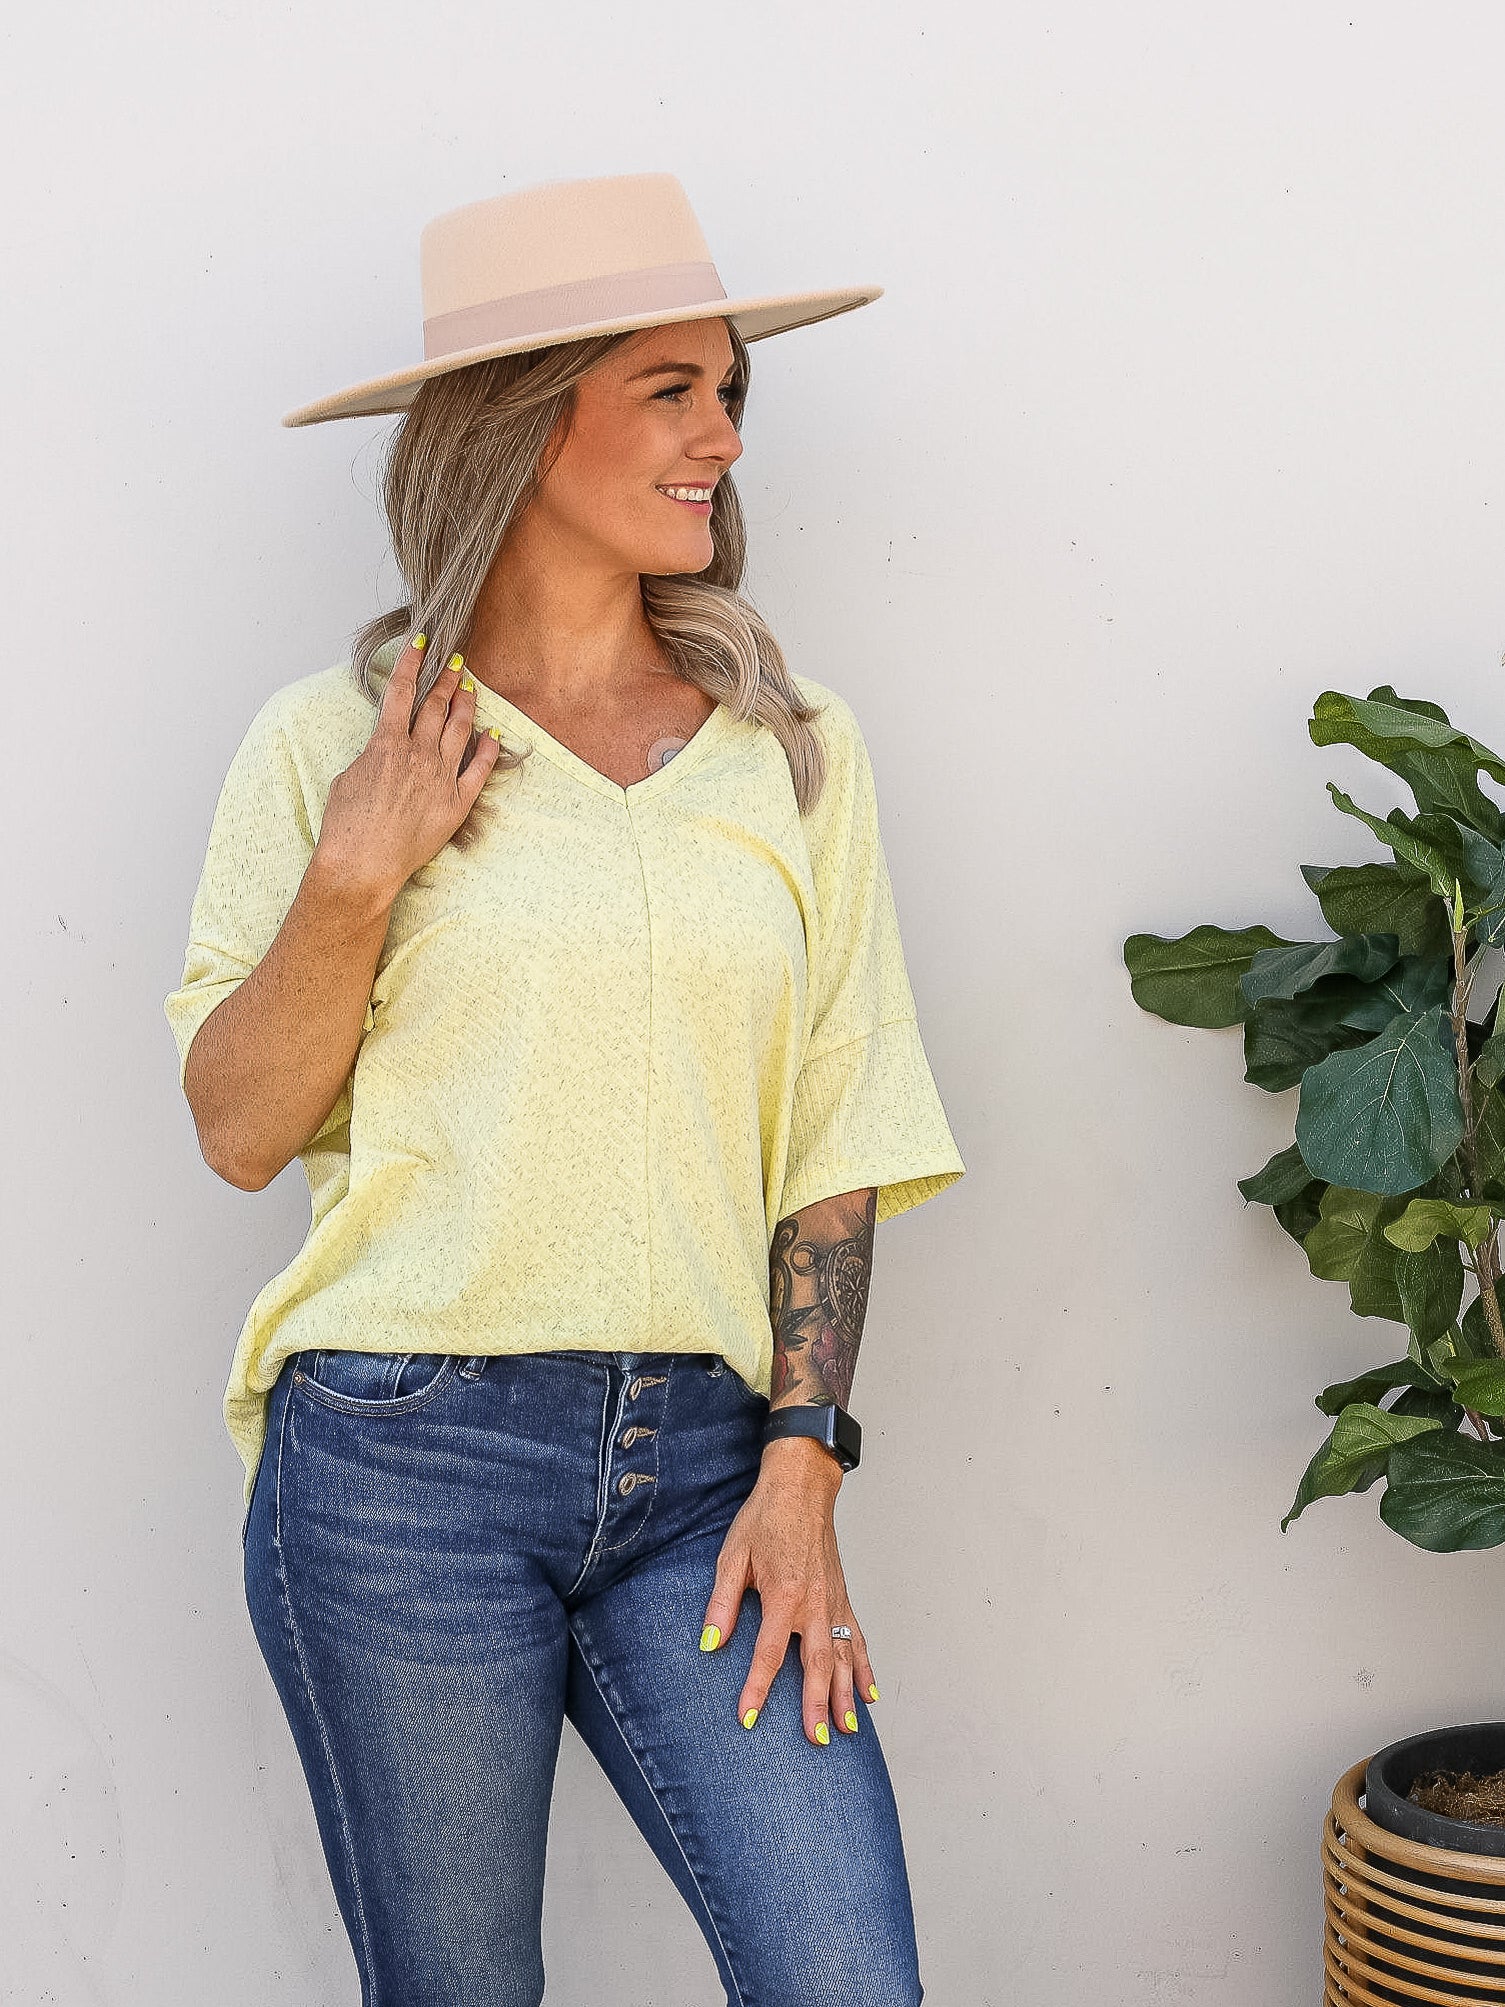 Yellow heathered short sleeve, v-neck top. Styled with jeans and wide hat.